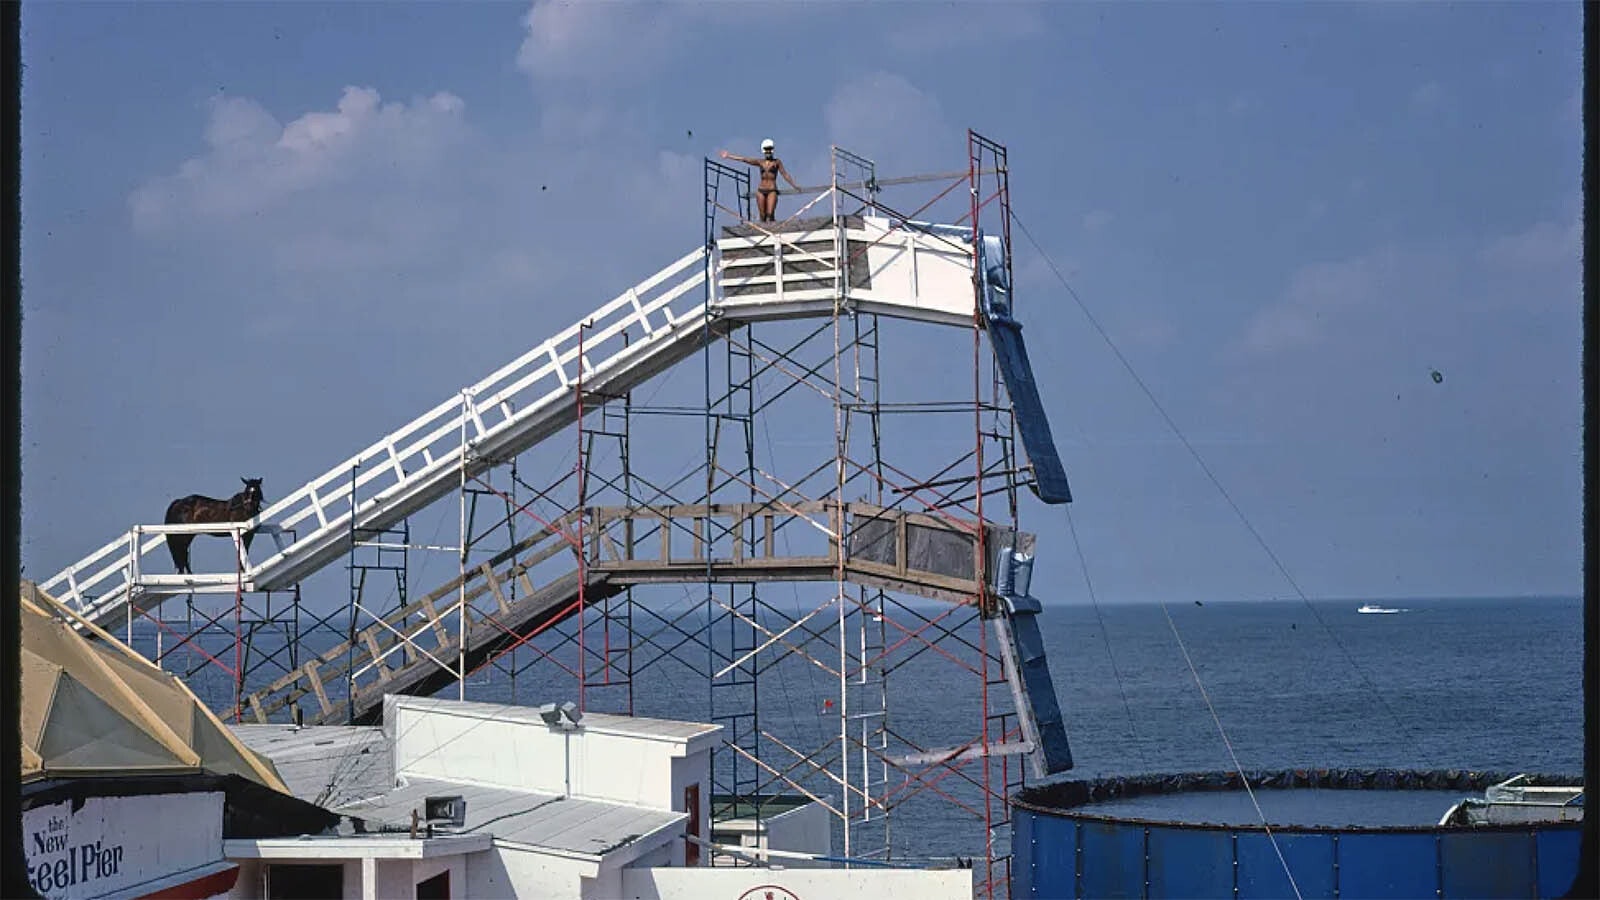 A picture of the last horse dive in Atlantic City in 1978. Note the significantly reduced height of the platforms from the 1920s.